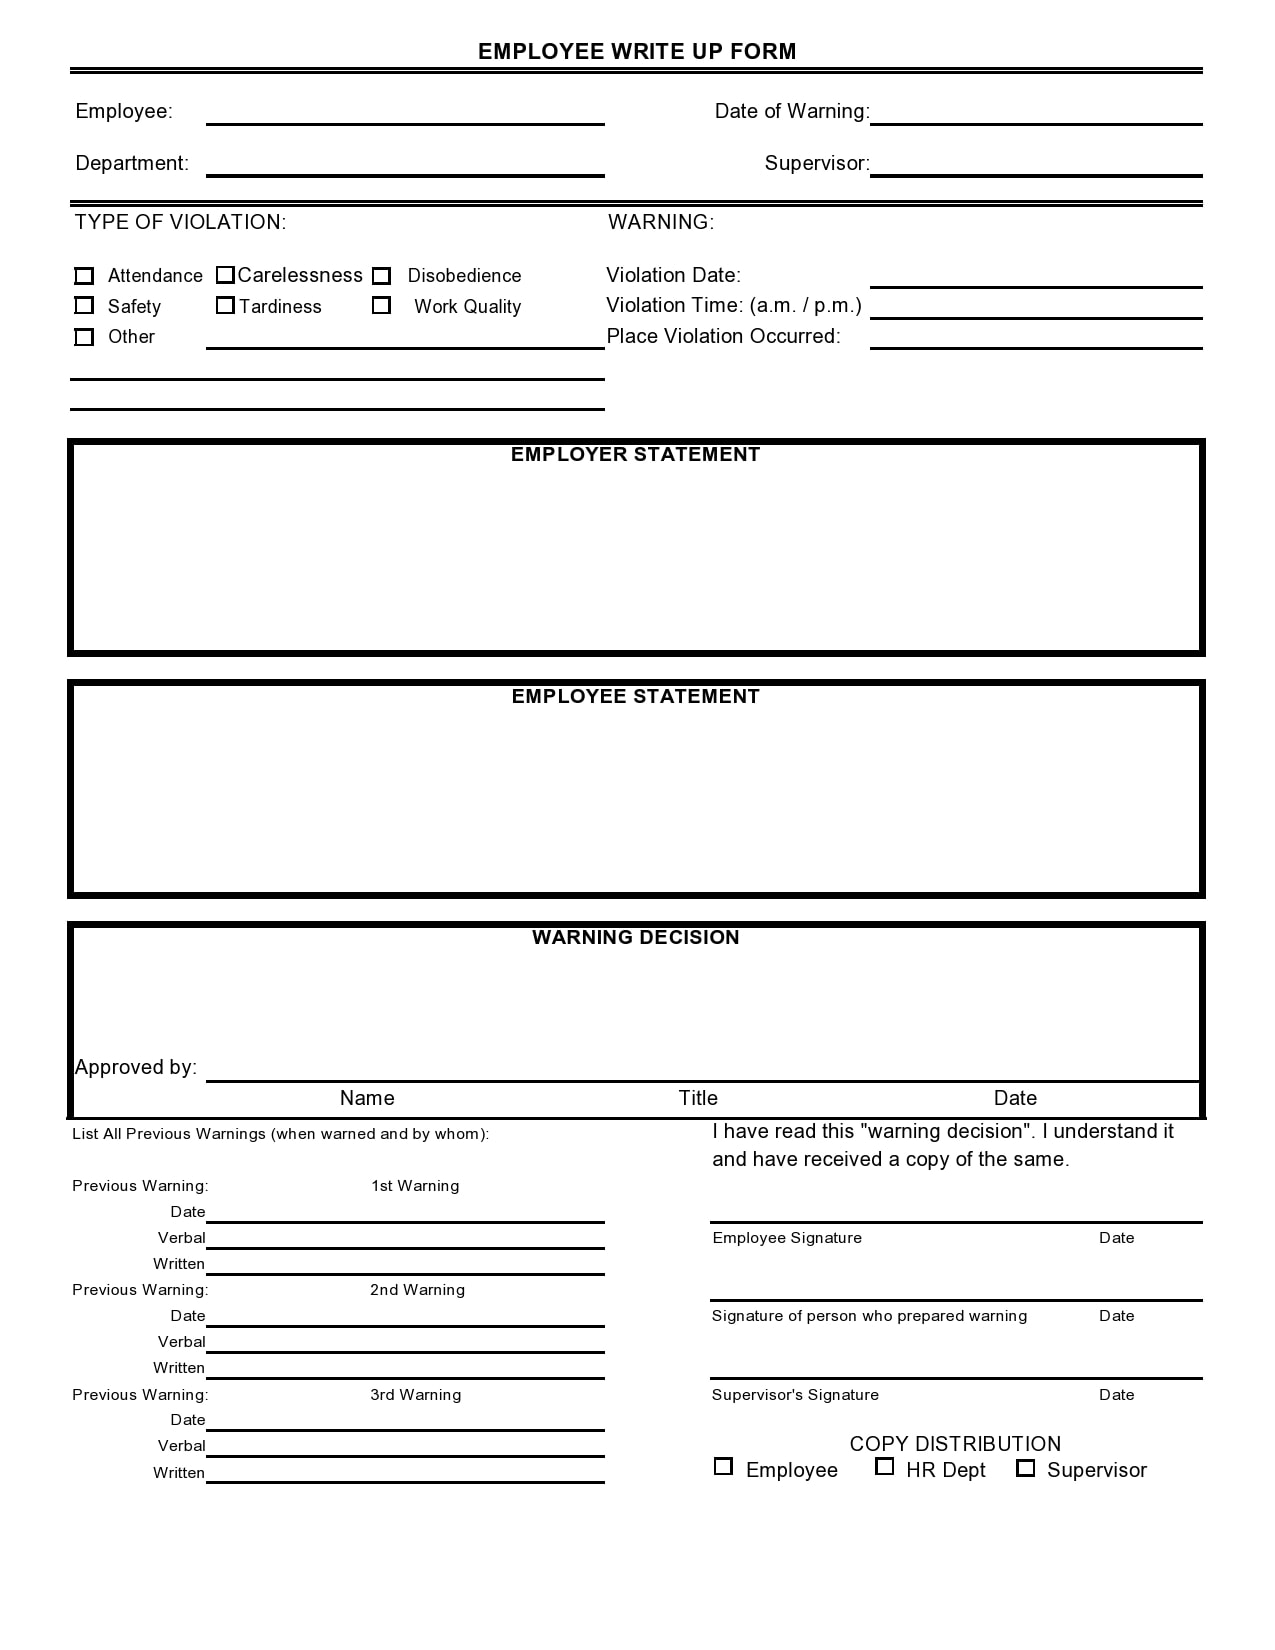 30 effective employee write up forms free download